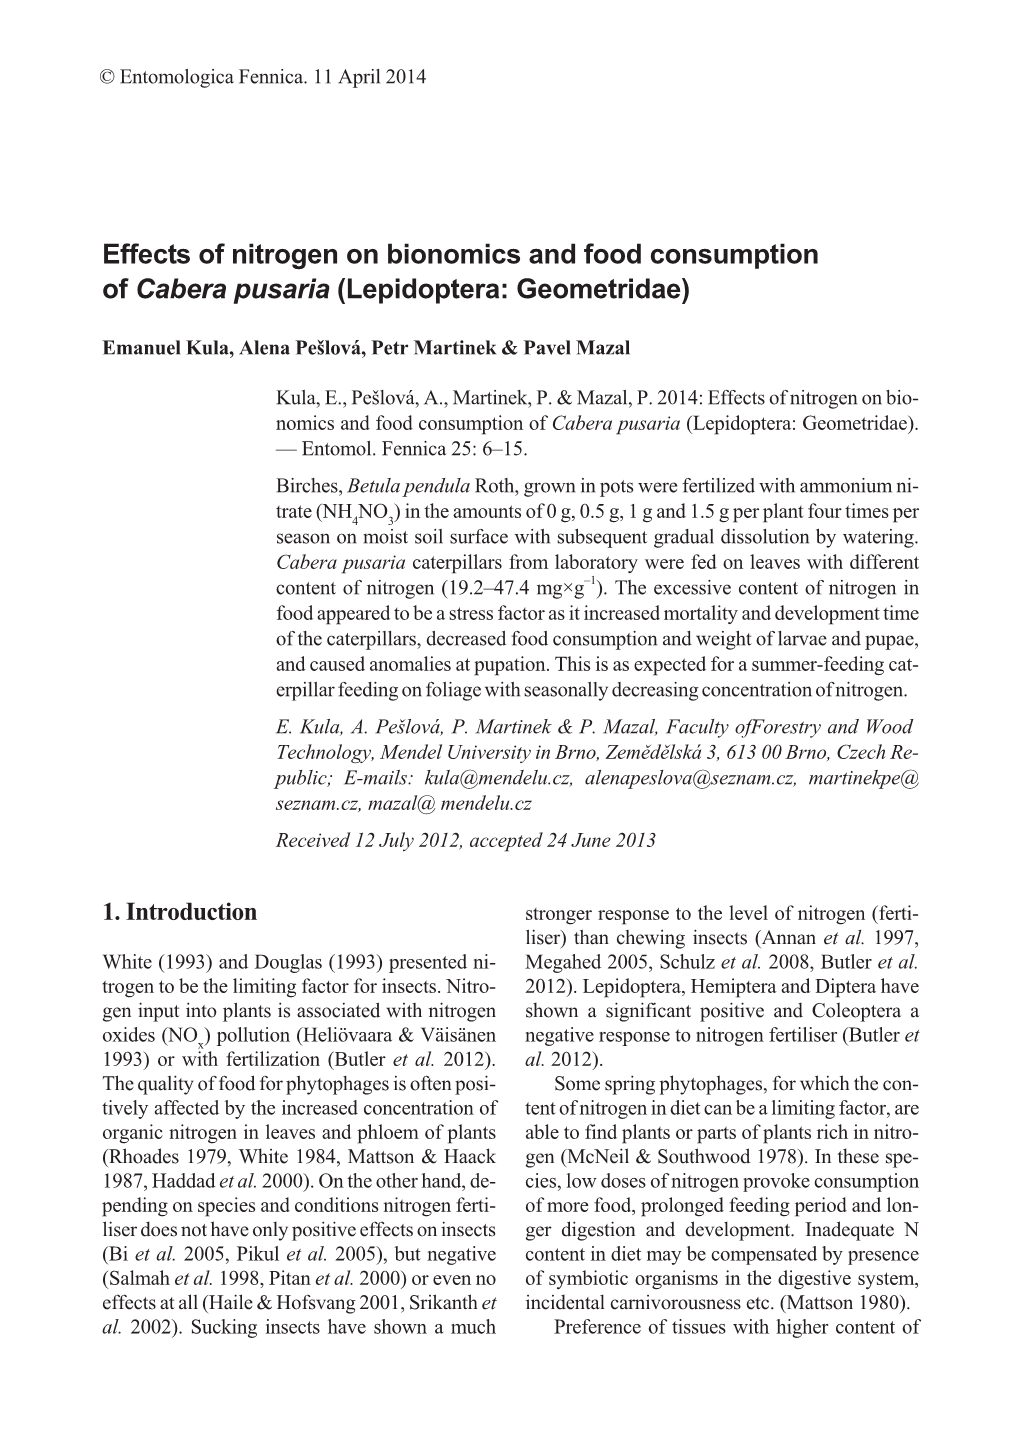 Effects of Nitrogen on Bionomics and Food Consumption of Cabera Pusaria (Lepidoptera: Geometridae)